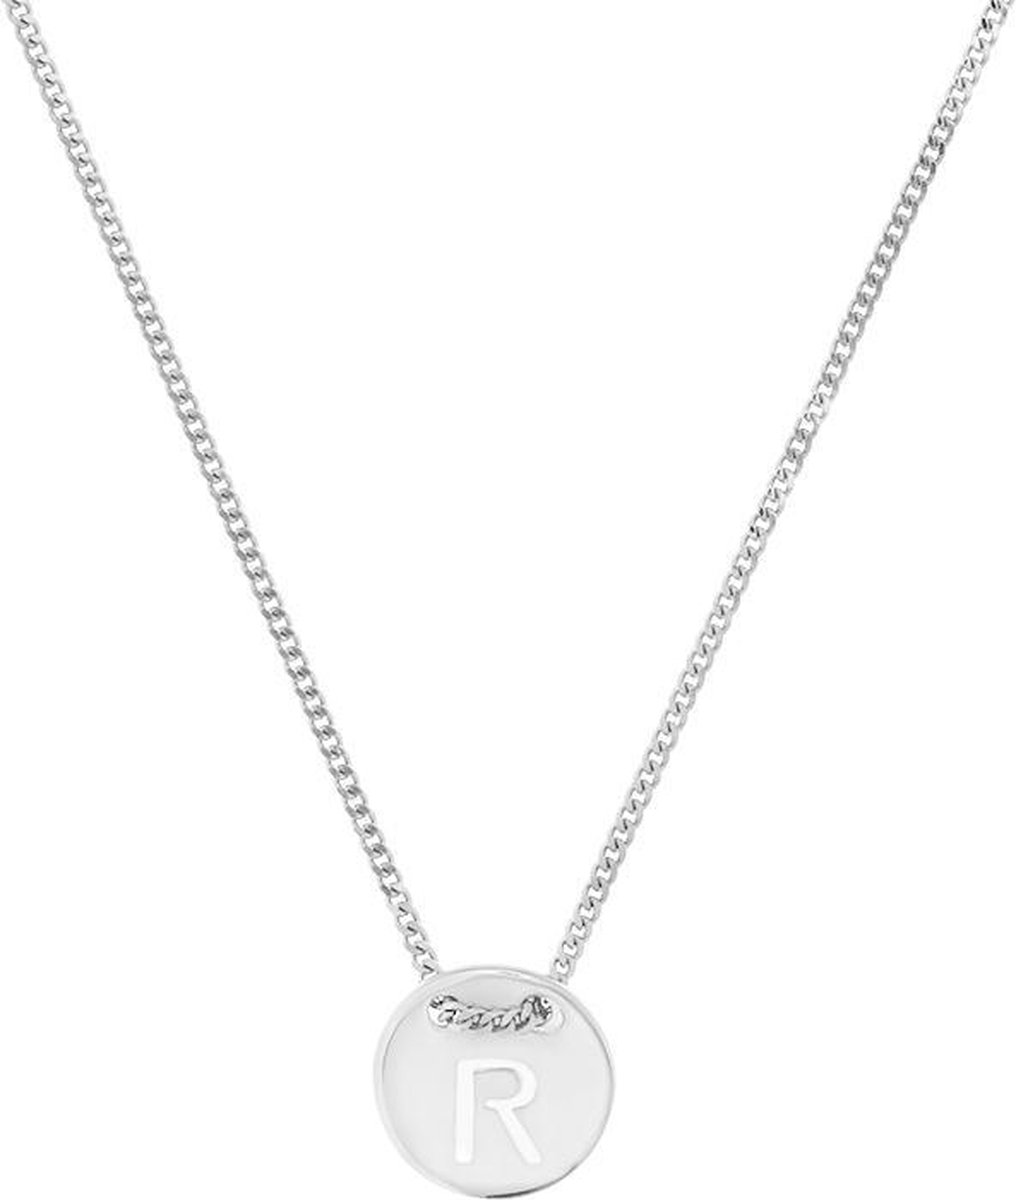 The Fashion Jewelry Collection Ketting Letter R 1,3 mm 41 + 4 cm - Zilver Gerhodineerd